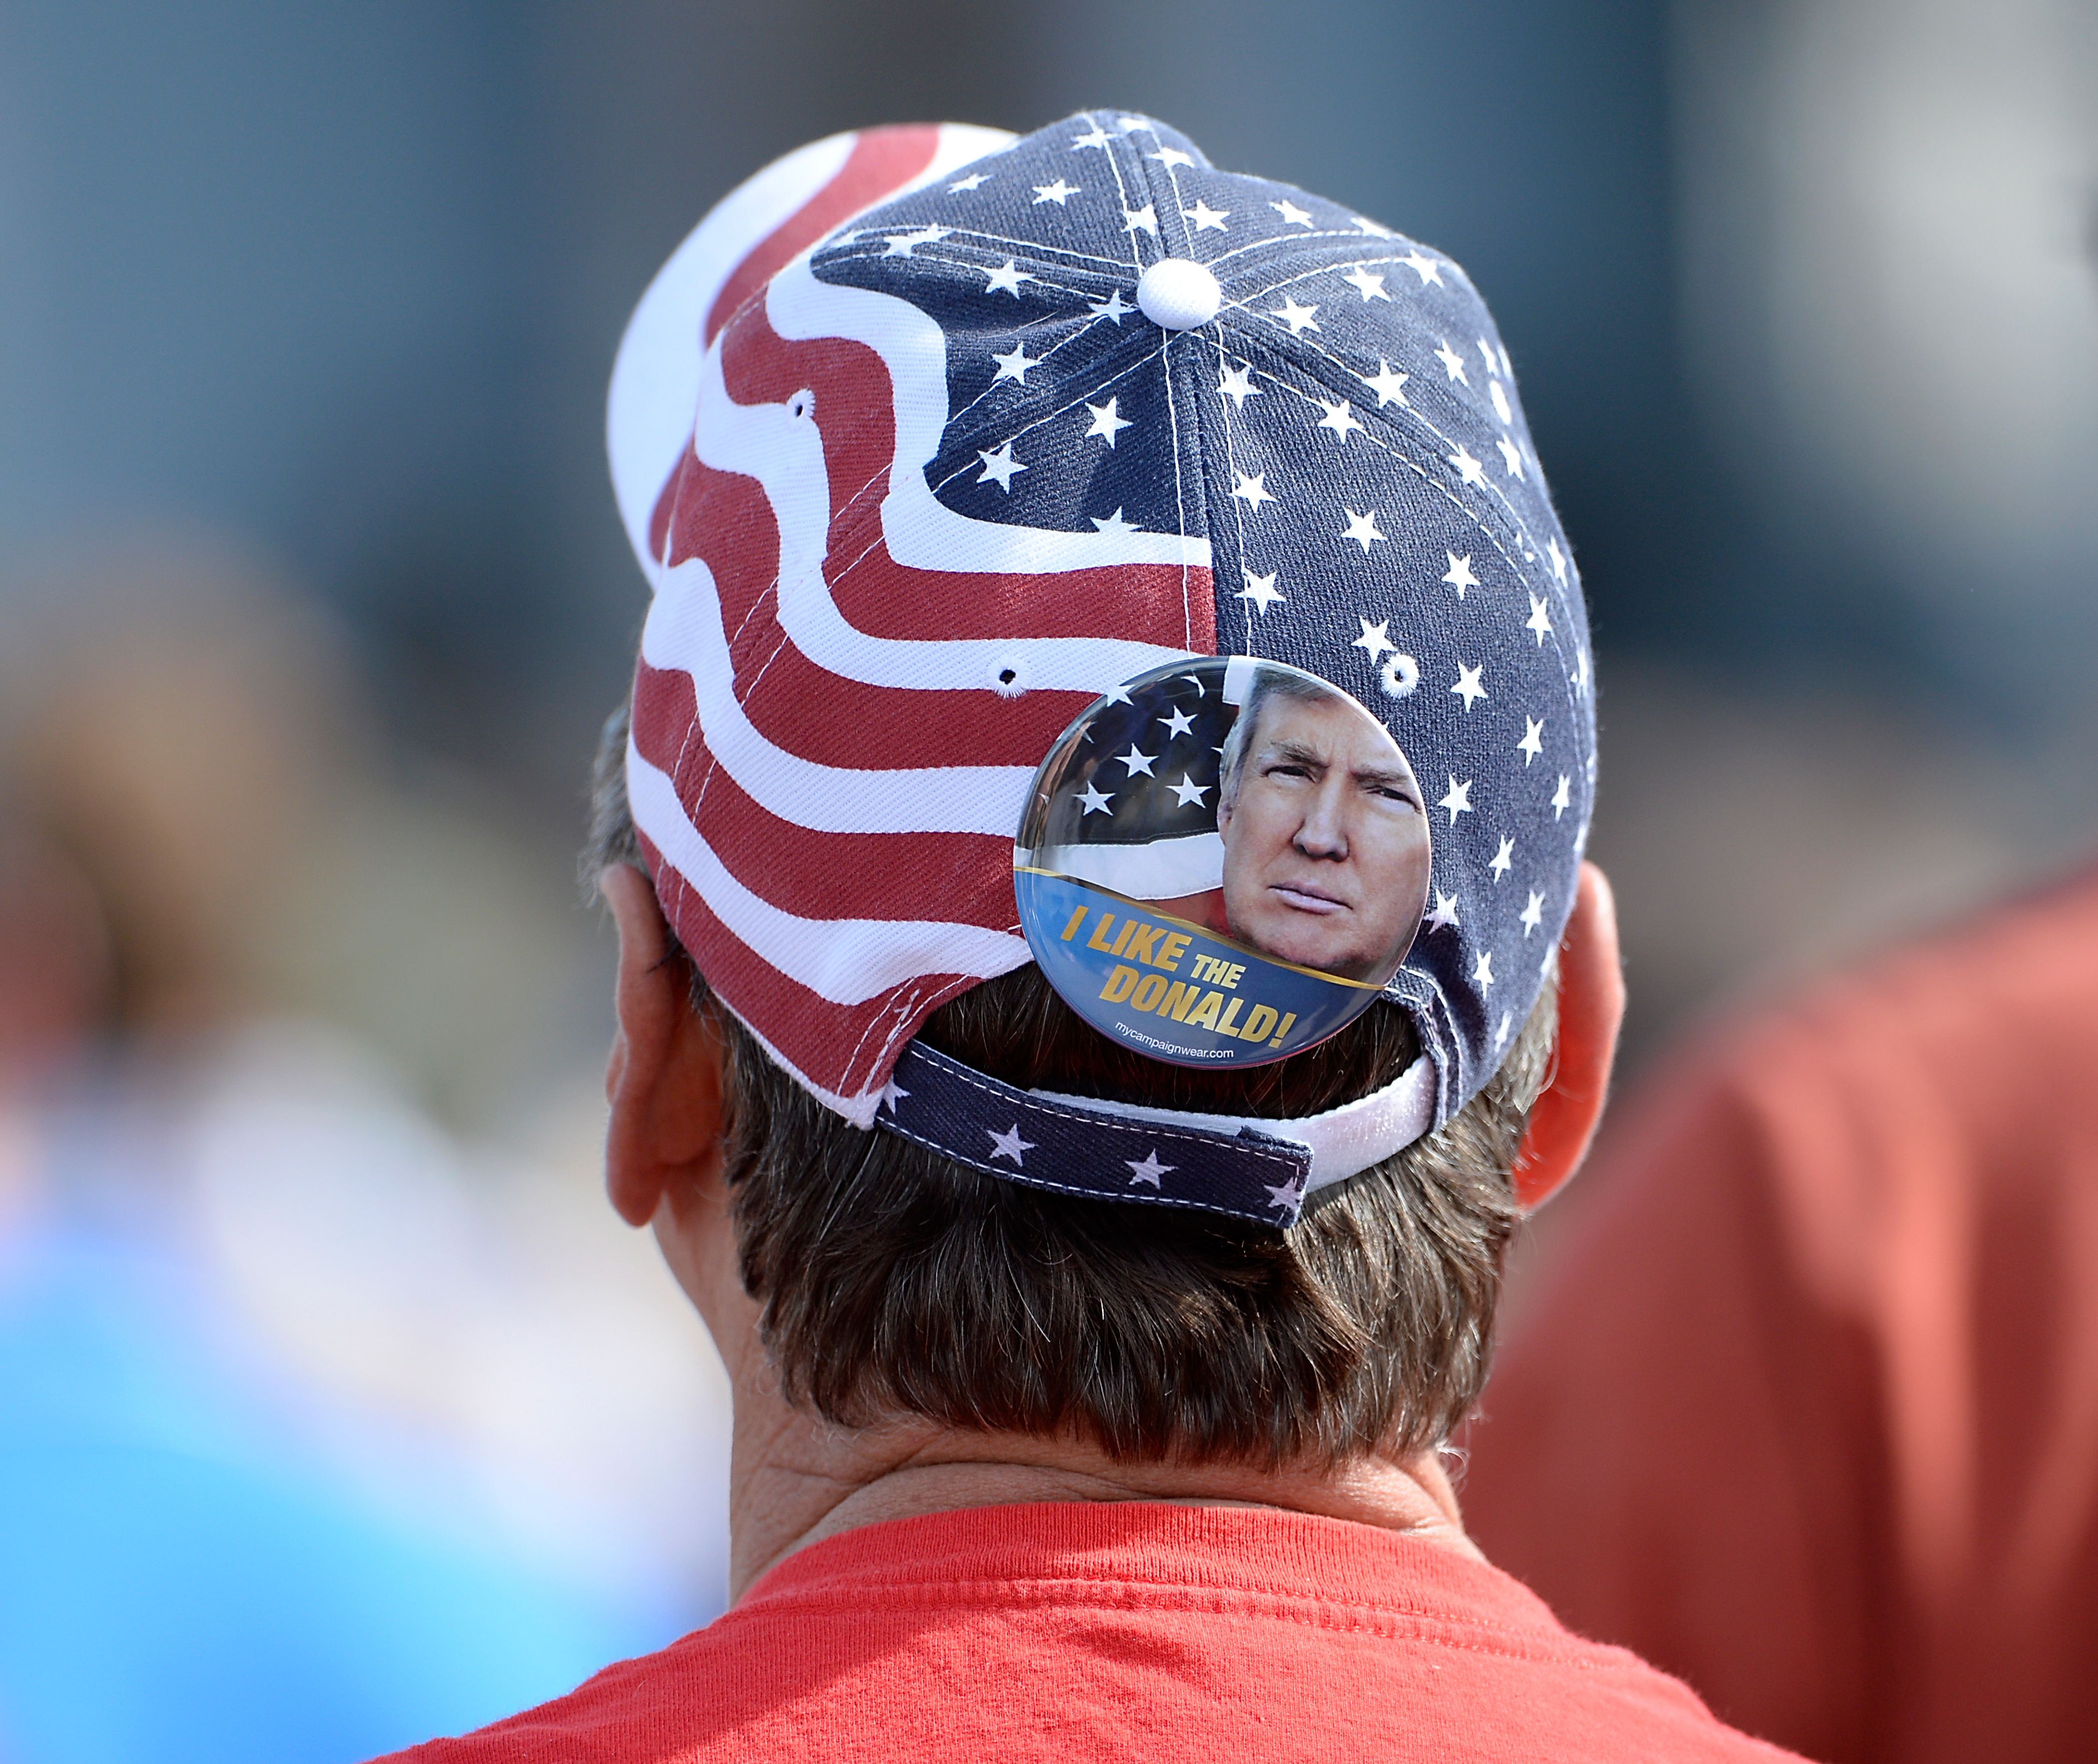 A supporter for Republican presidential candidate Donald Trump wears regalia at a rally on October 31, 2015 in Norfolk, Virginia. (Sara D. Davis & Getty Images)